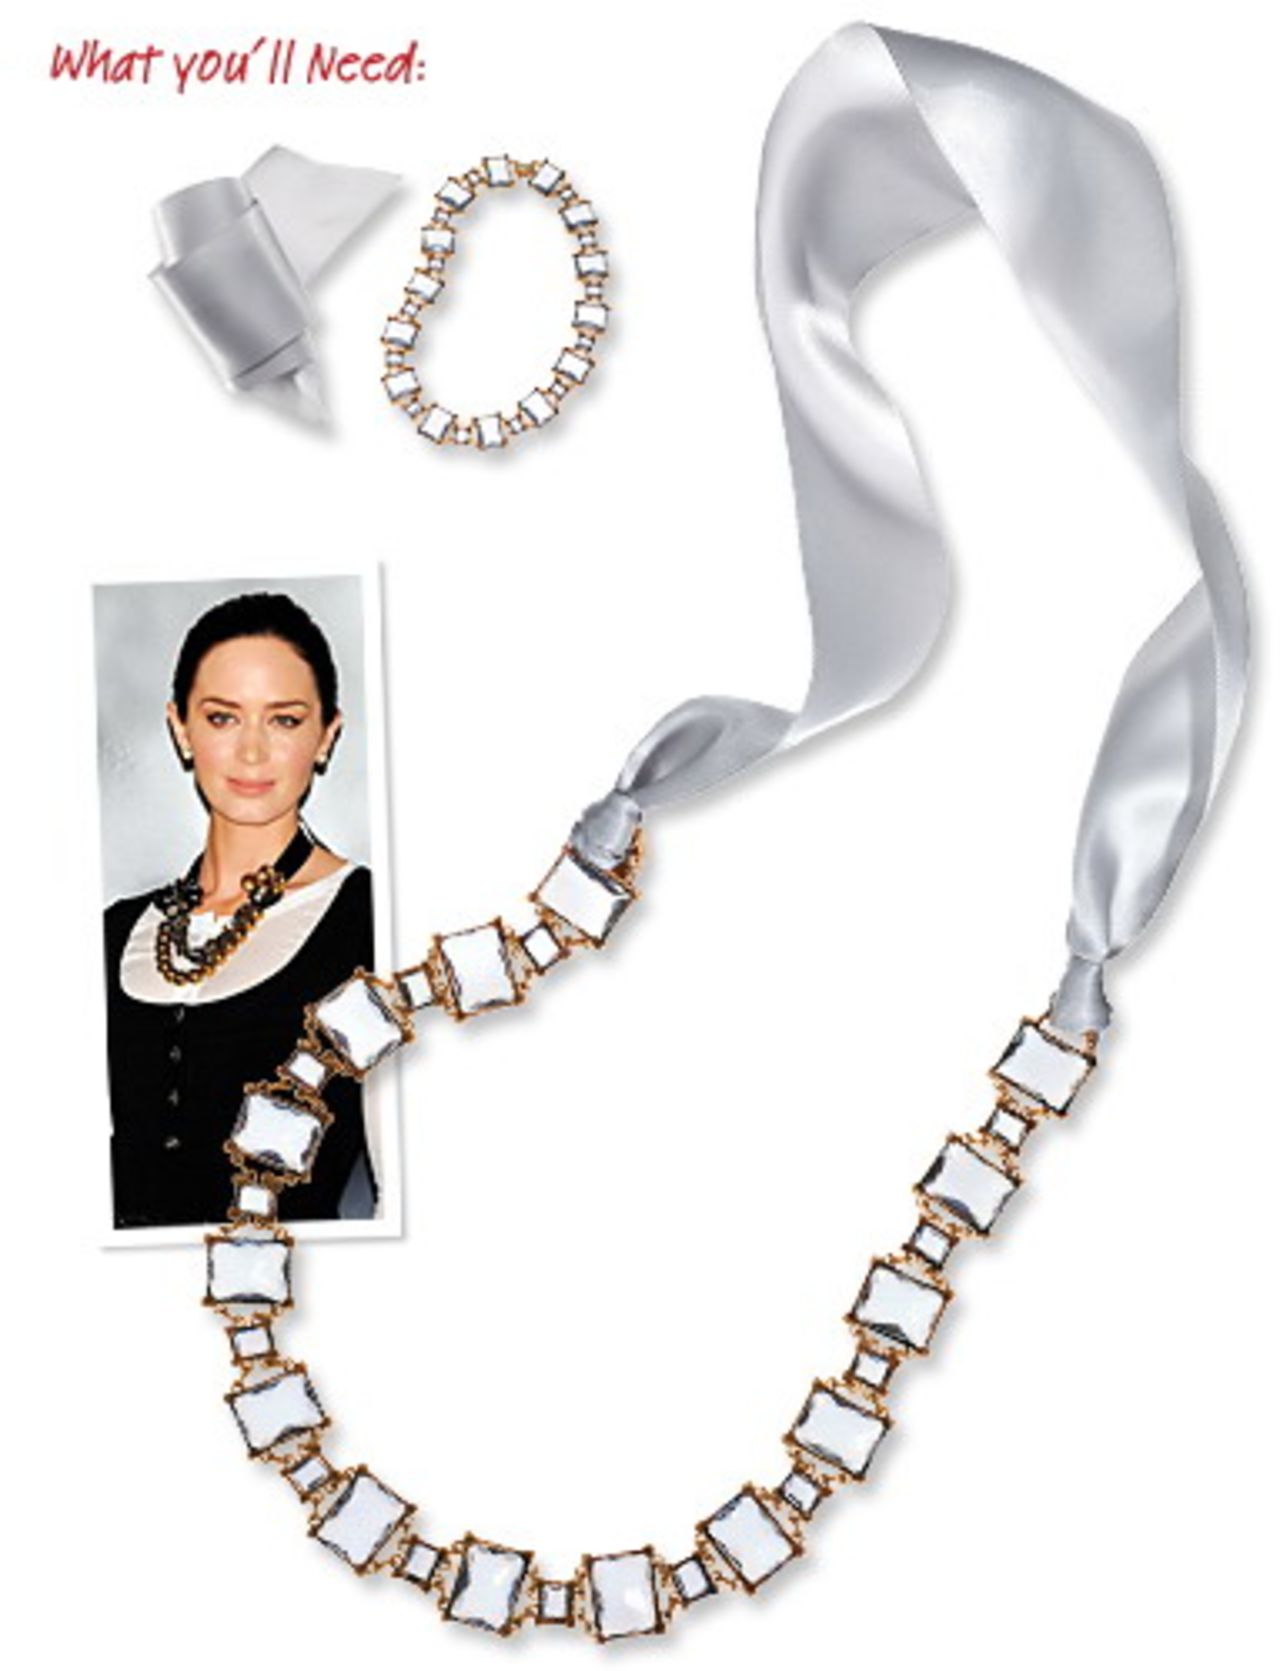 Ribbon necklace, inspired by Emily Blunt.